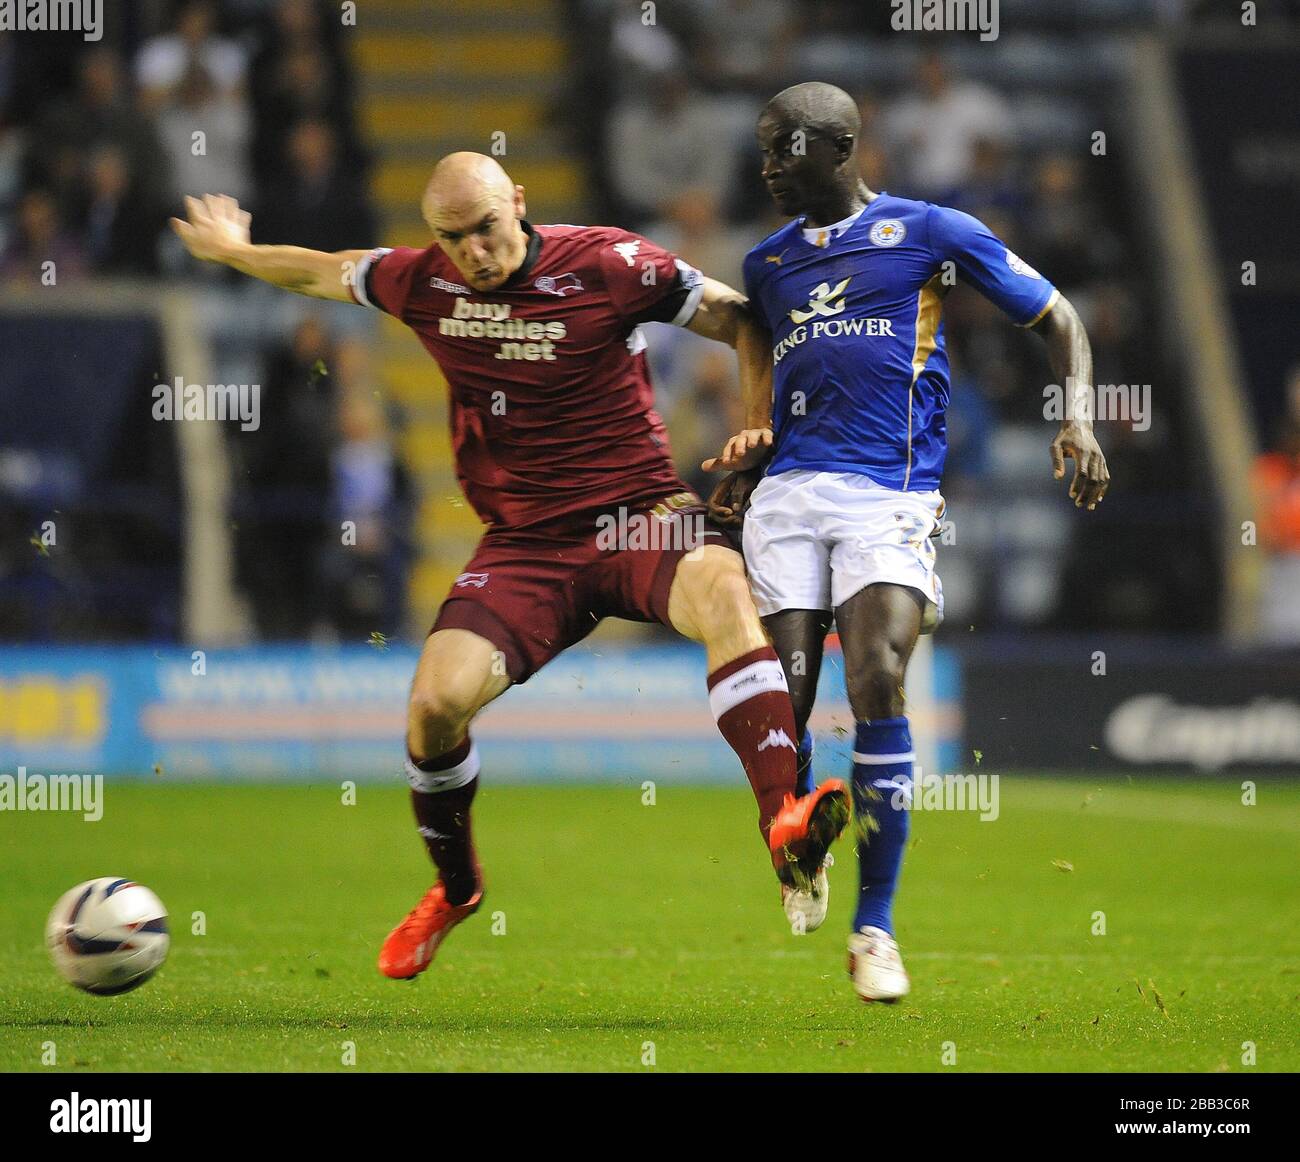 Leicester City's Zoumana Bakayogo (right) and Derby County's Conor Sammon (left) battle for the ball. Stock Photo